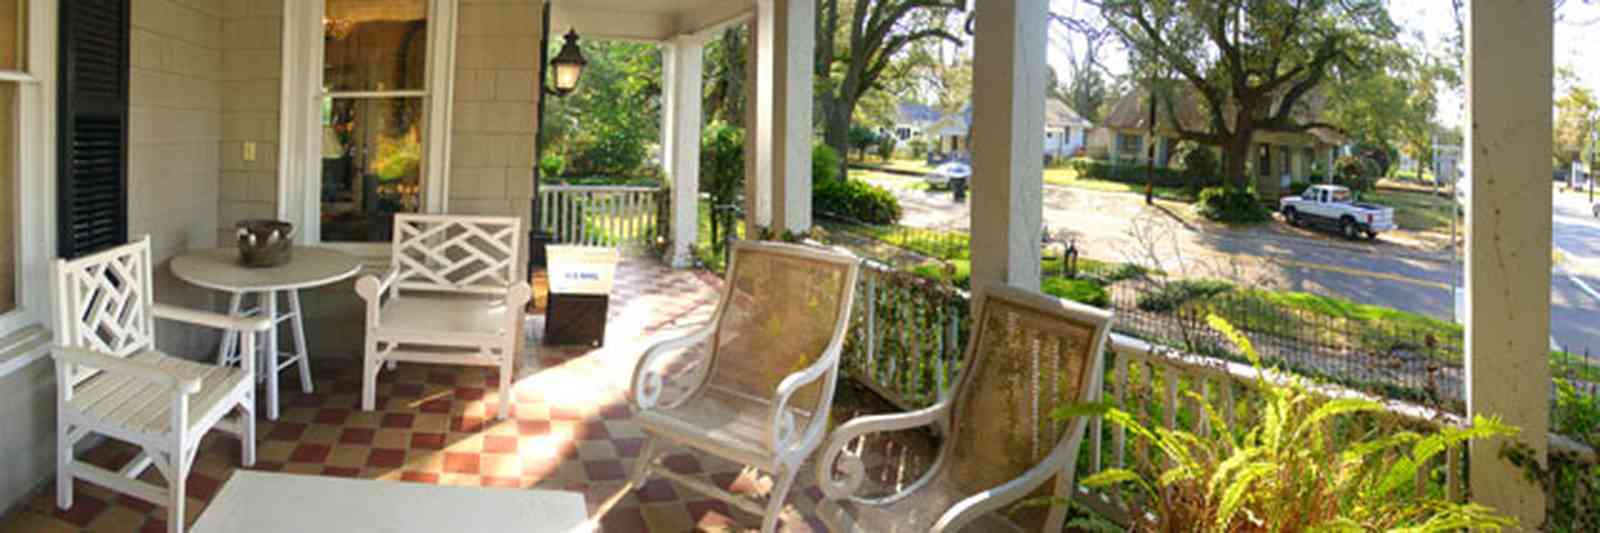 East-Hill:-McAlpin-Shop_10.jpg:  front porch, traditional style, colonial home, oak tree, 